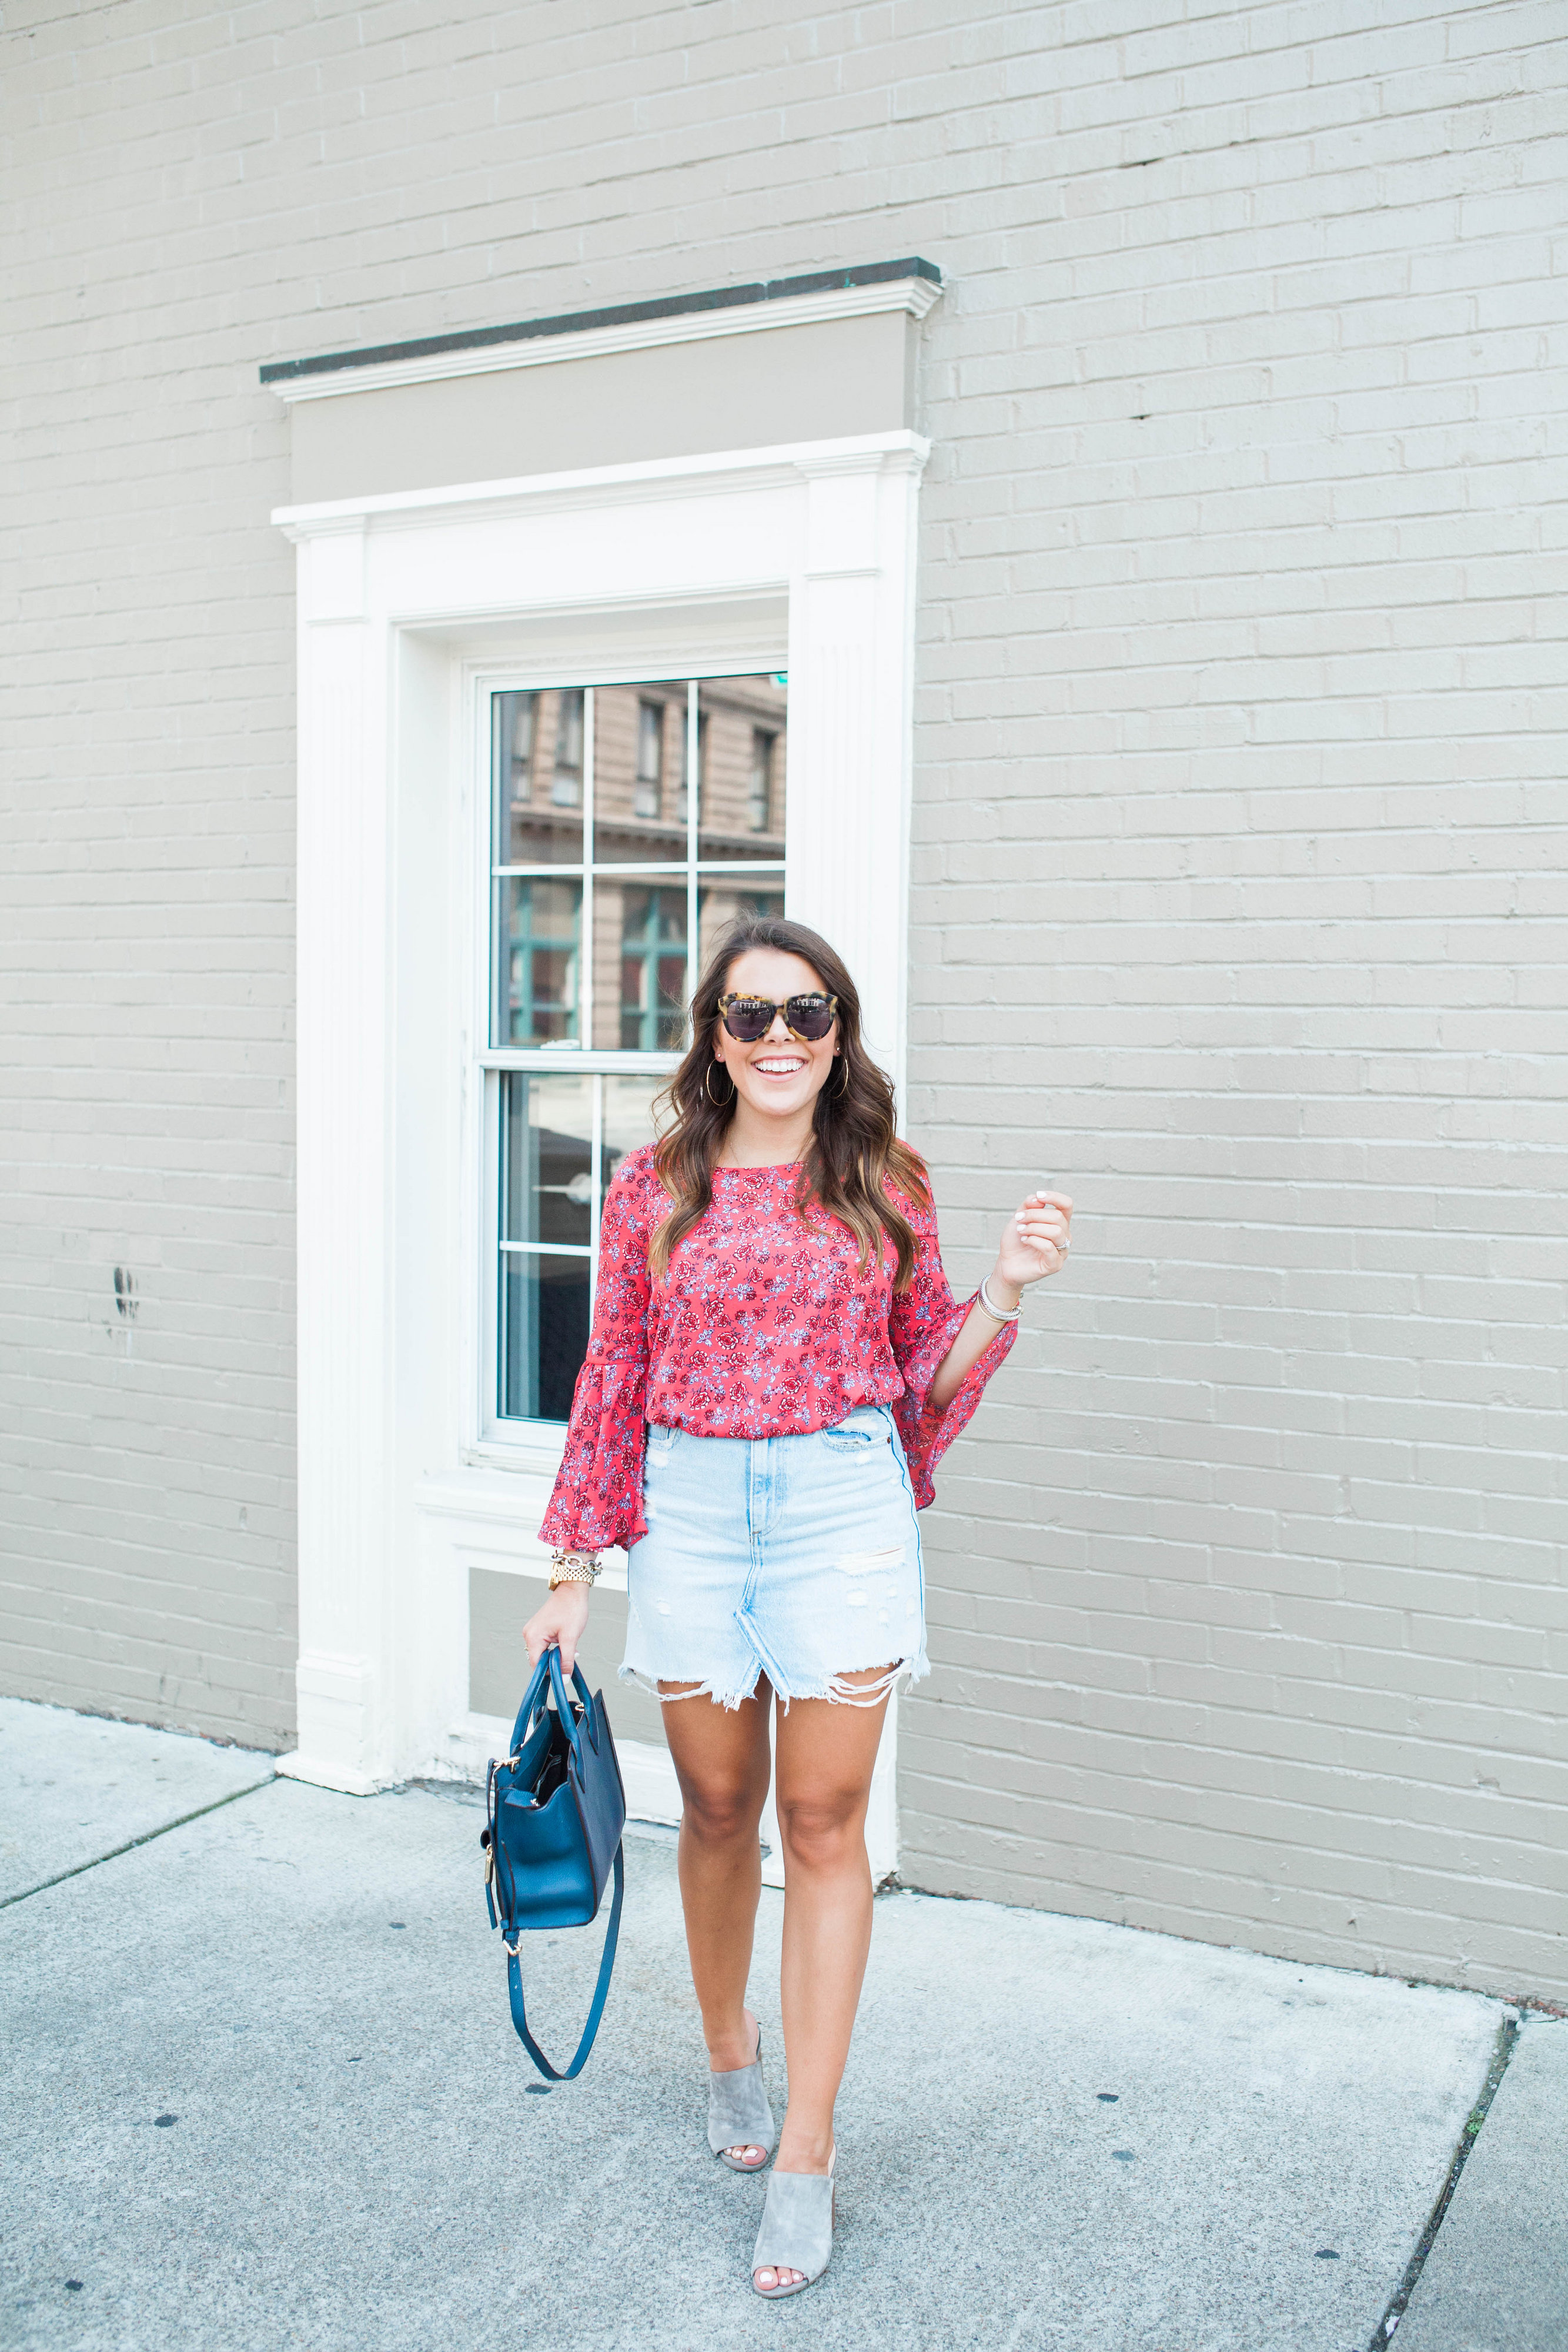 How to wear a denim skirt for fall